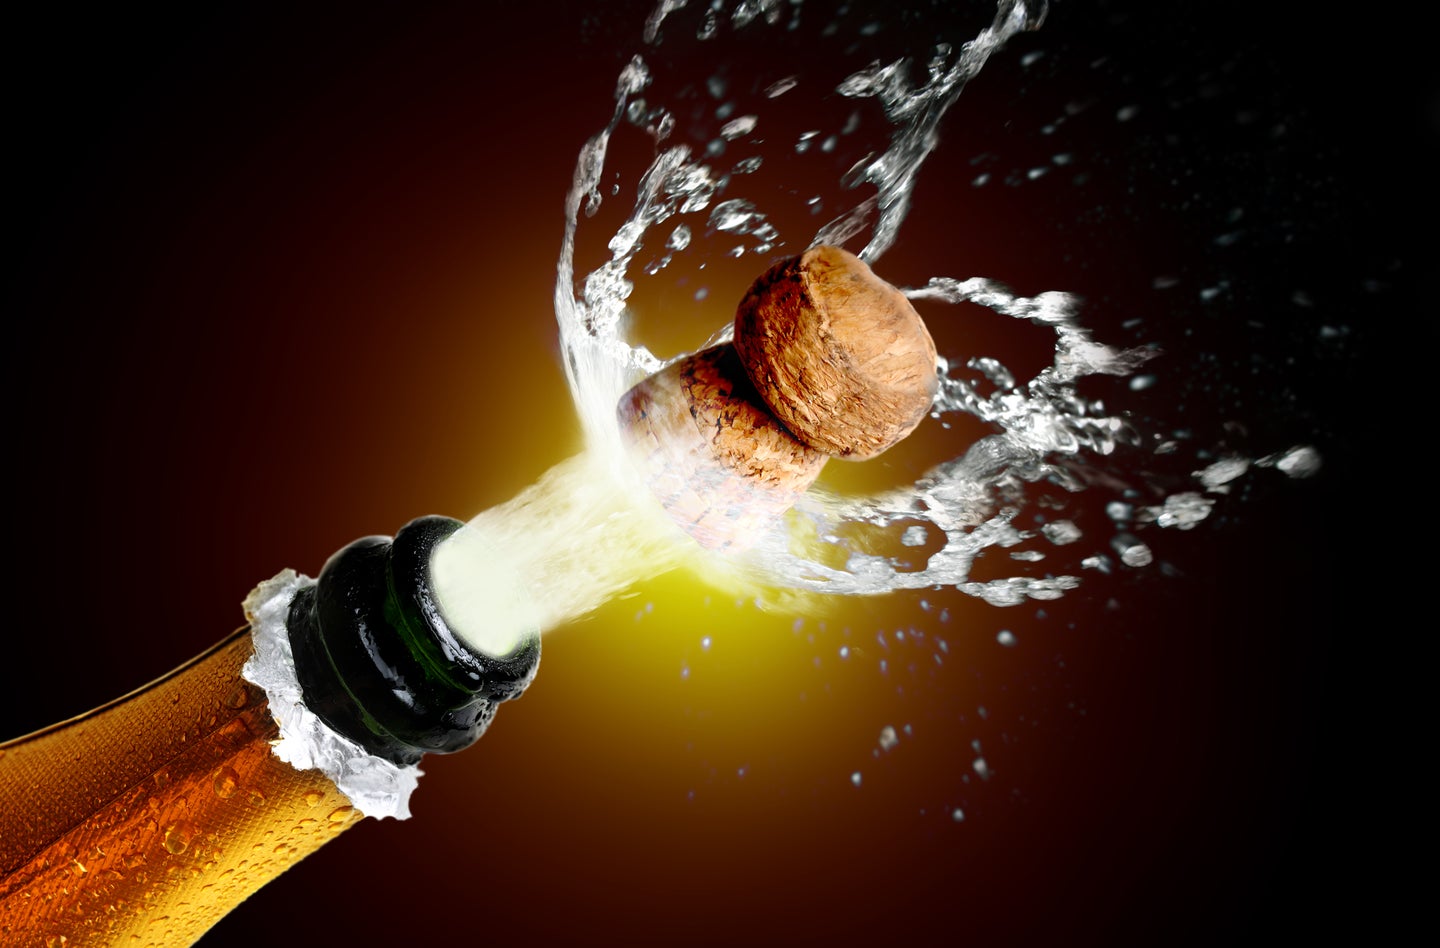 Gold and green champagne bottle with cork popped and bubbles rushing out on a black background